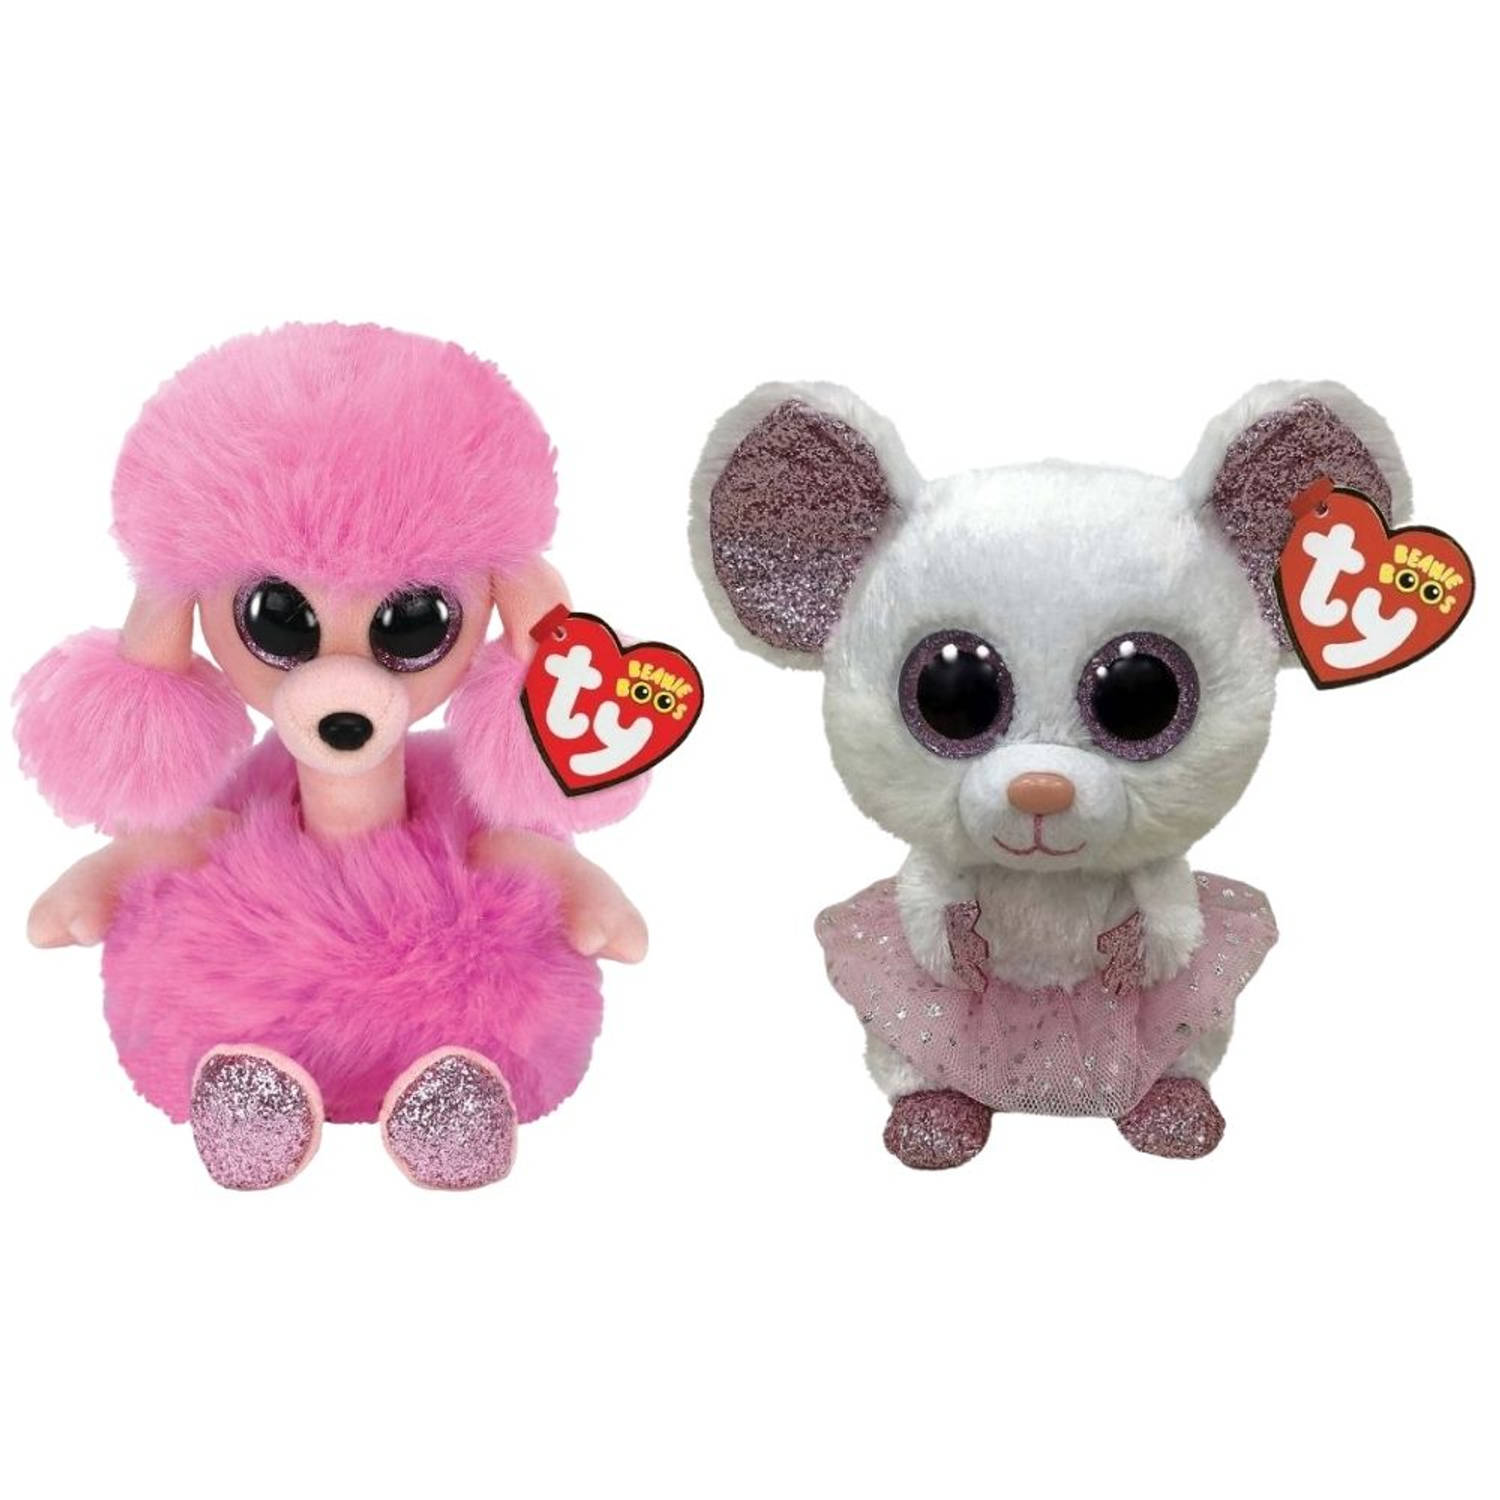 Ty - Knuffel - Beanie Boo's - Camilla Poodle & Nina Mousse